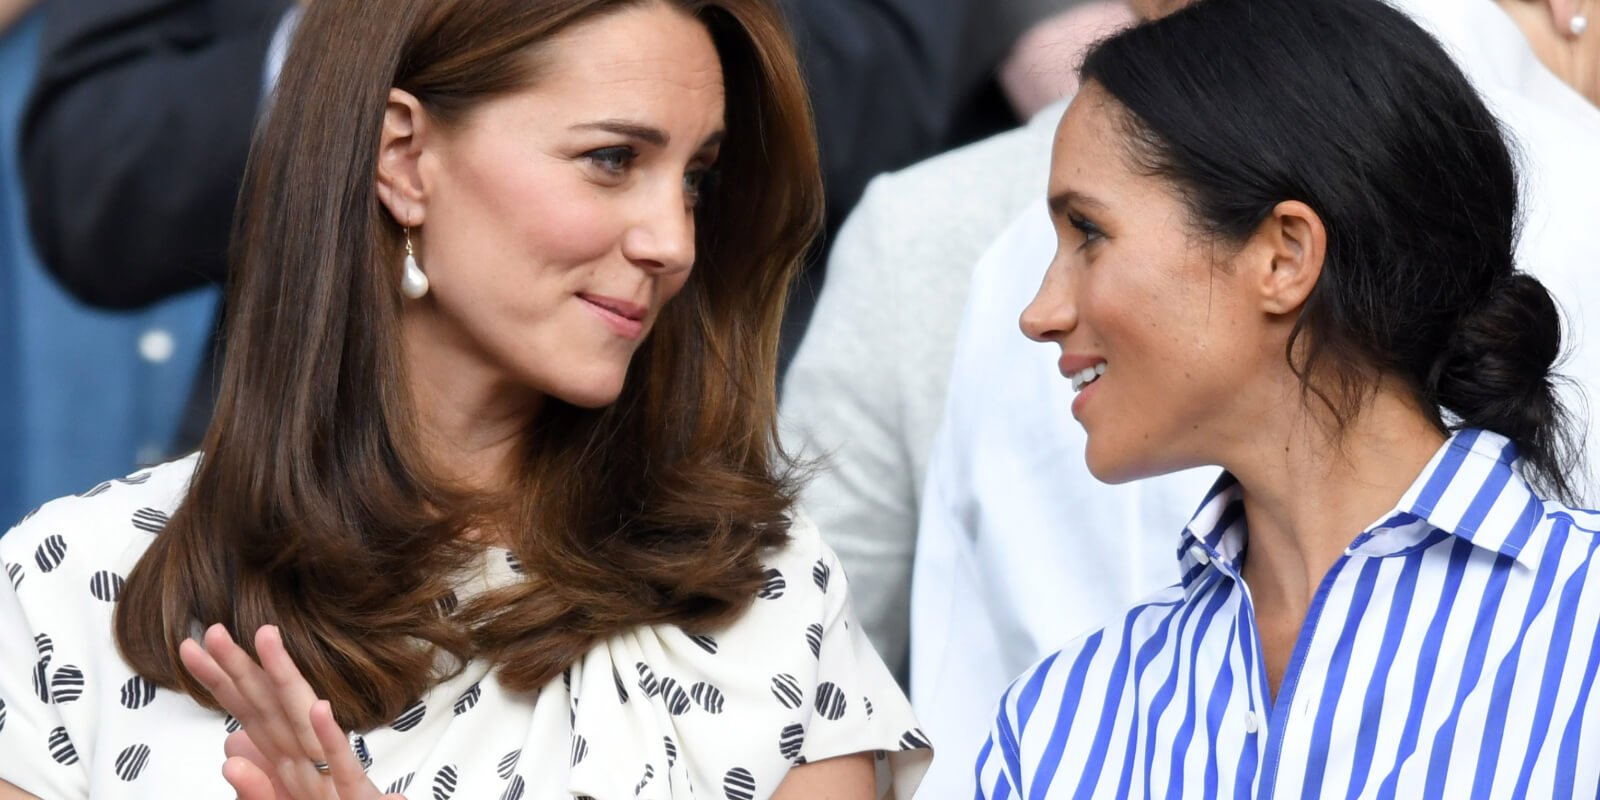 Kate Middleton and Meghan Markle at Wimbledon Tennis Championships at the All England Lawn Tennis and Croquet Club on July 14, 2018 in London, England.